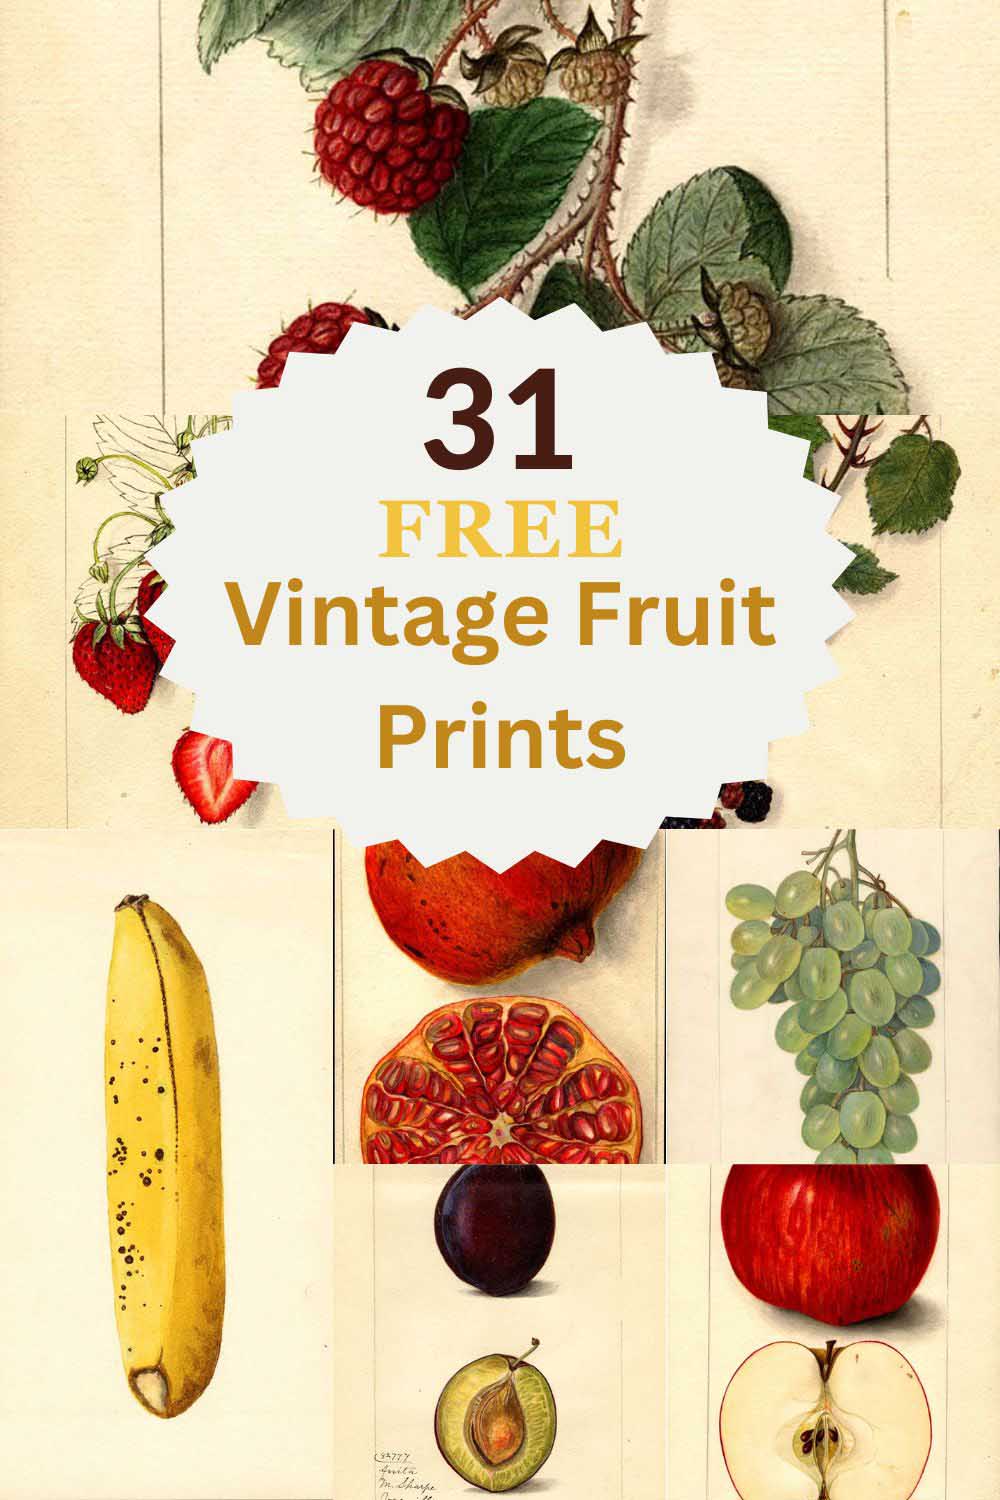 31 free vintage fruit prints from the Pomological collection pin